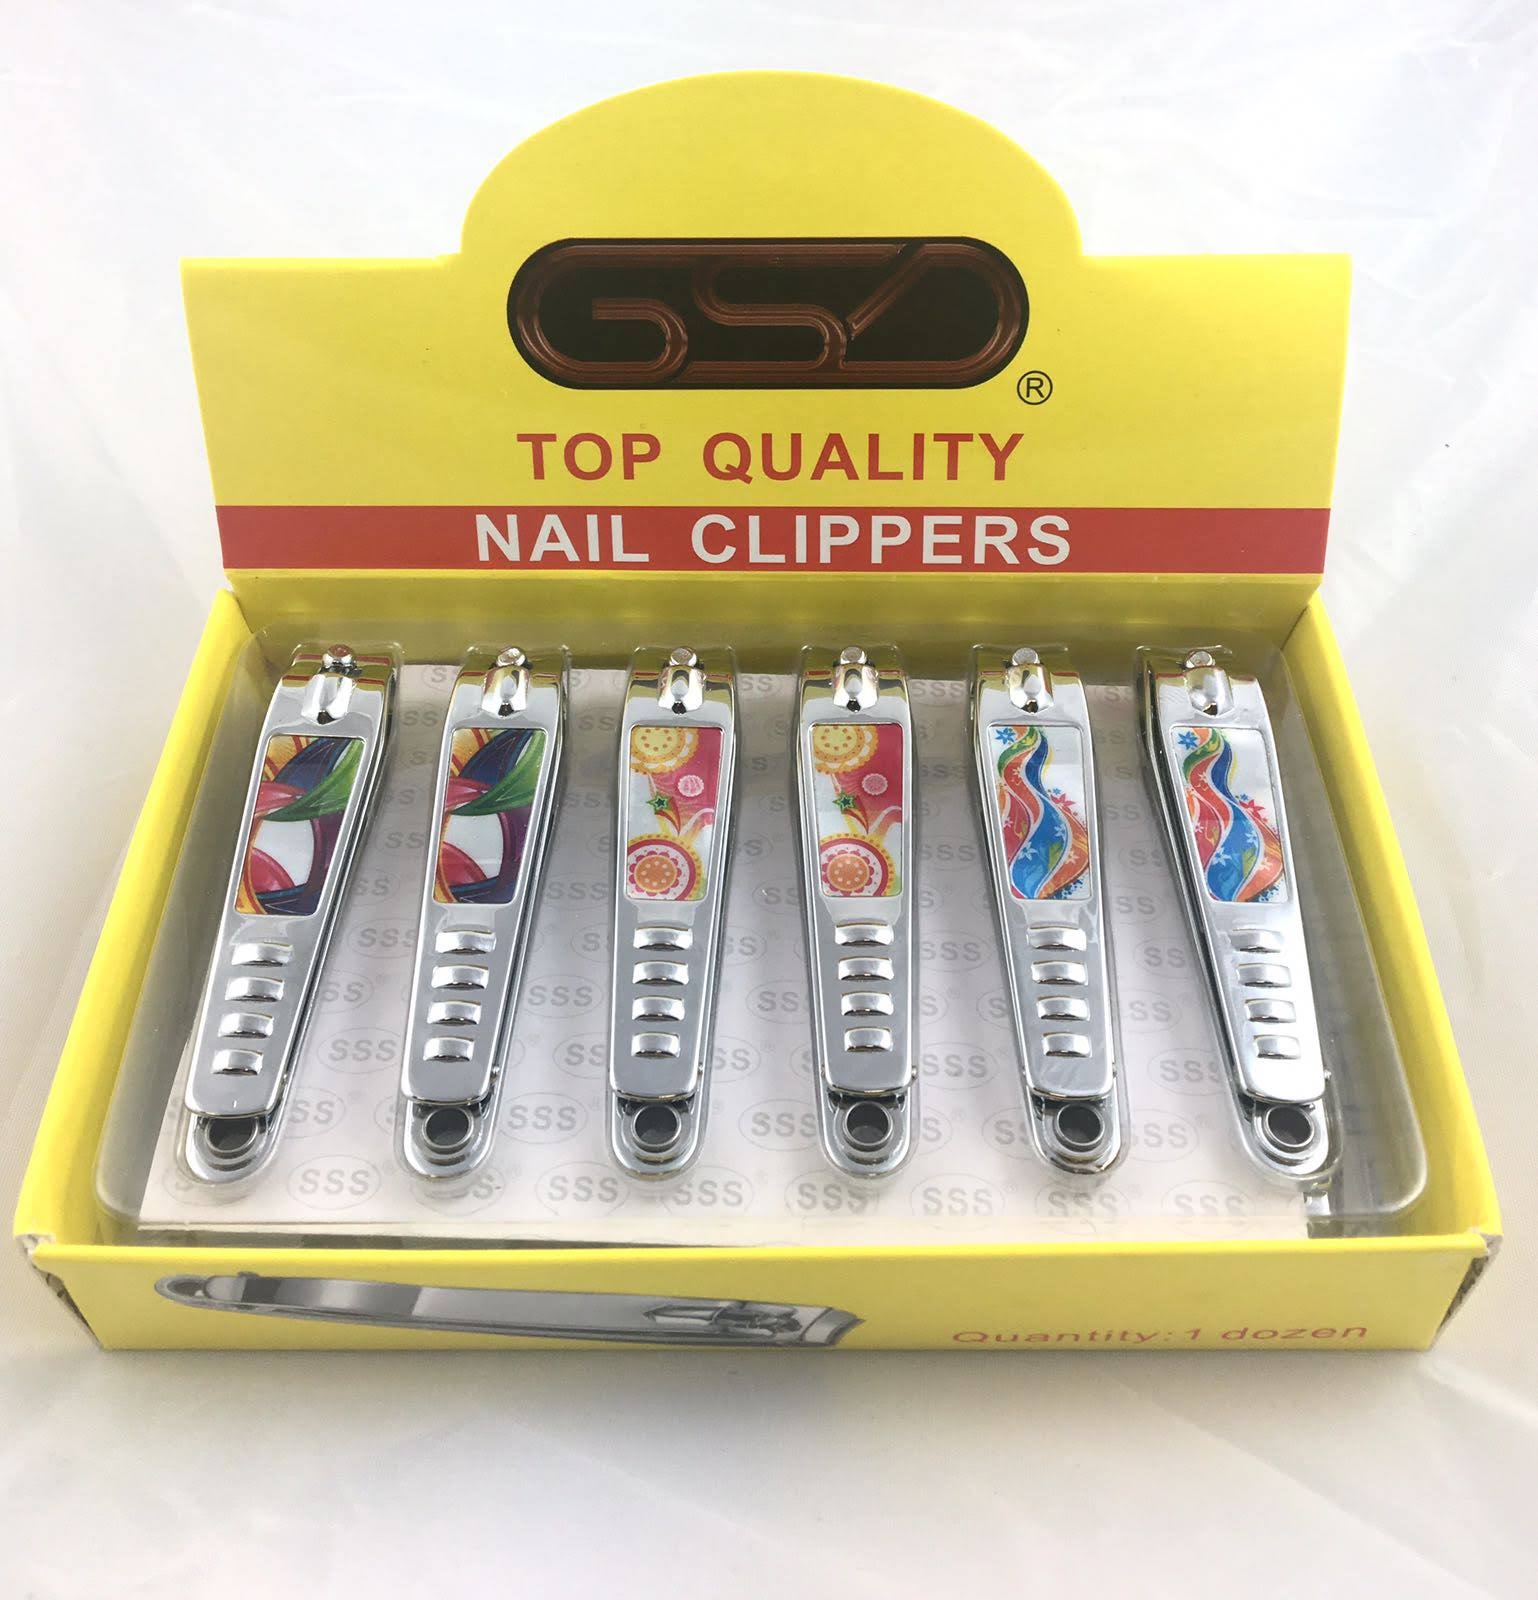 GSD Nail Clippers (Box of 12 Nail Clippers)